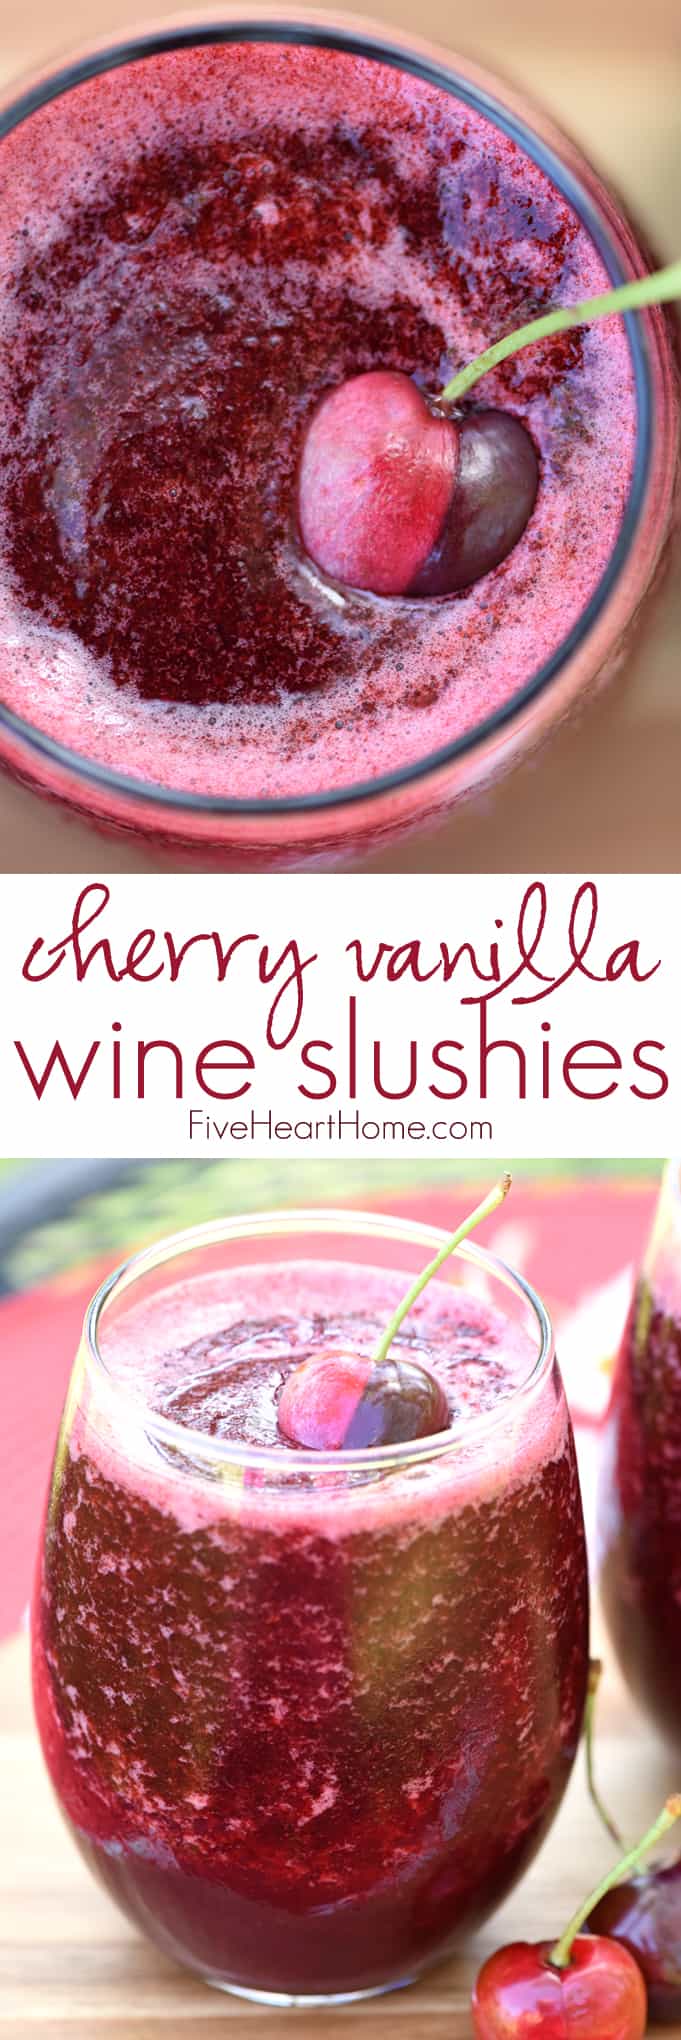 Cherry Vanilla Wine Slushies ~ fruity Moscato slushies are a refreshing way to cool off when the weather heats up, and this scrumptious version boasts juicy dark cherries and a hint of pure vanilla! | FiveHeartHome.com via @fivehearthome